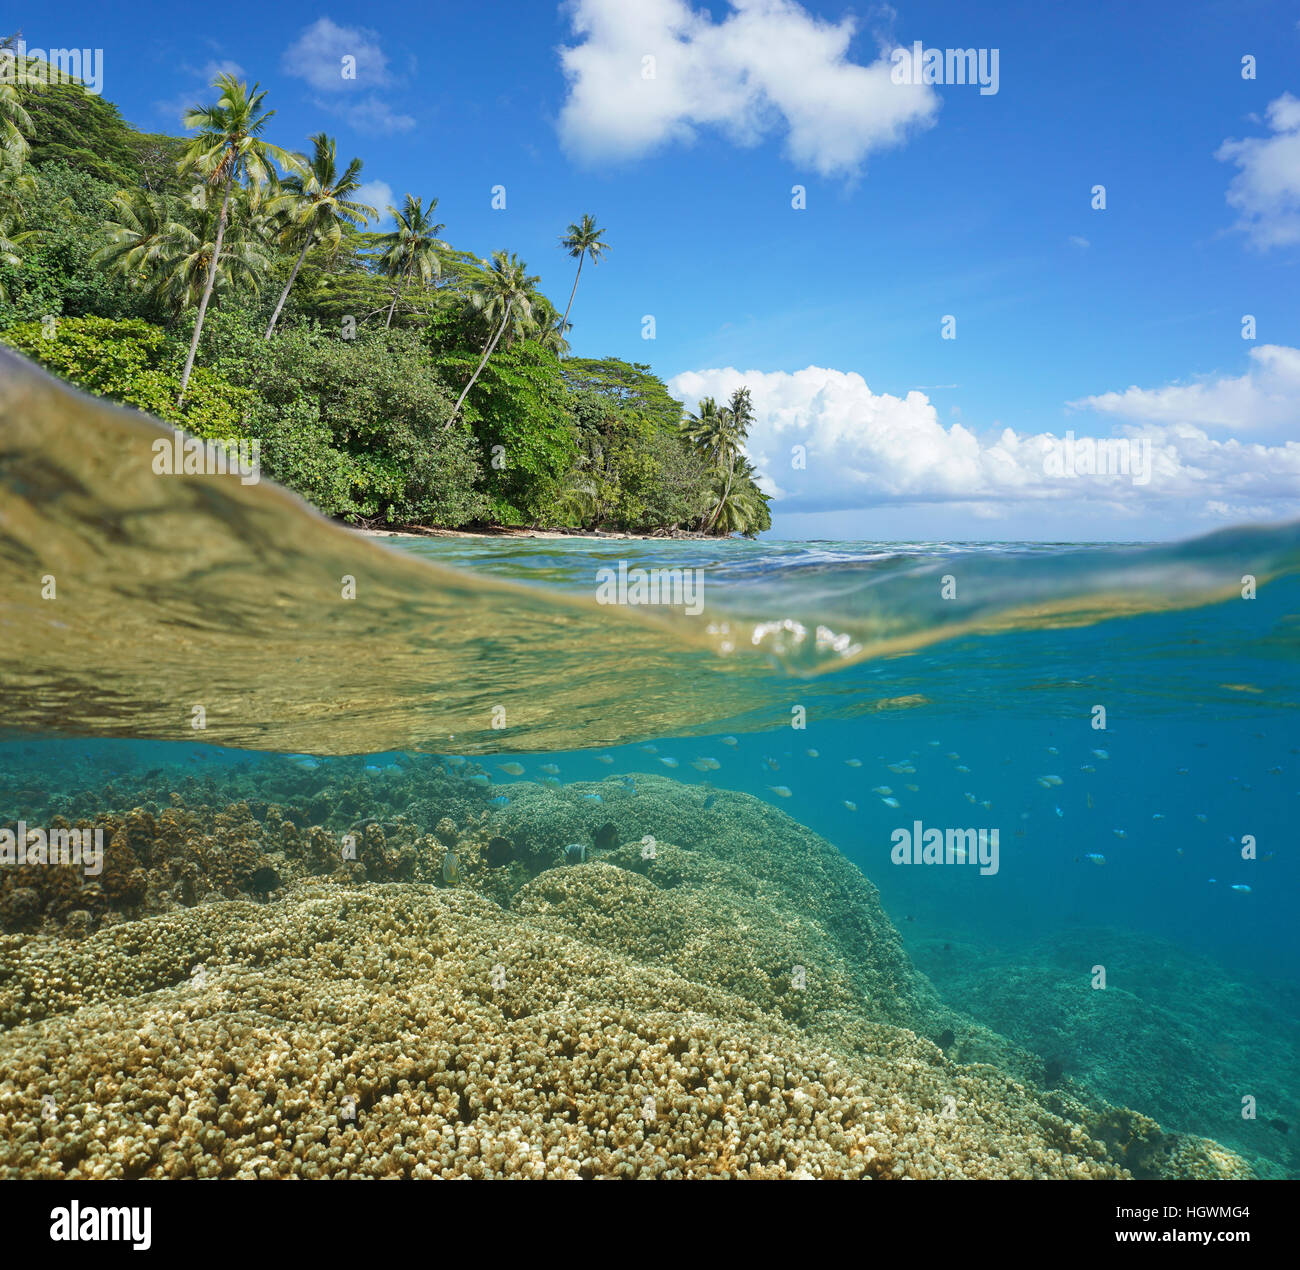 Half and half over and under the water surface, lush tropical coast and coral reef with fish underwater split by waterline, Pacific ocean, French Poly Stock Photo